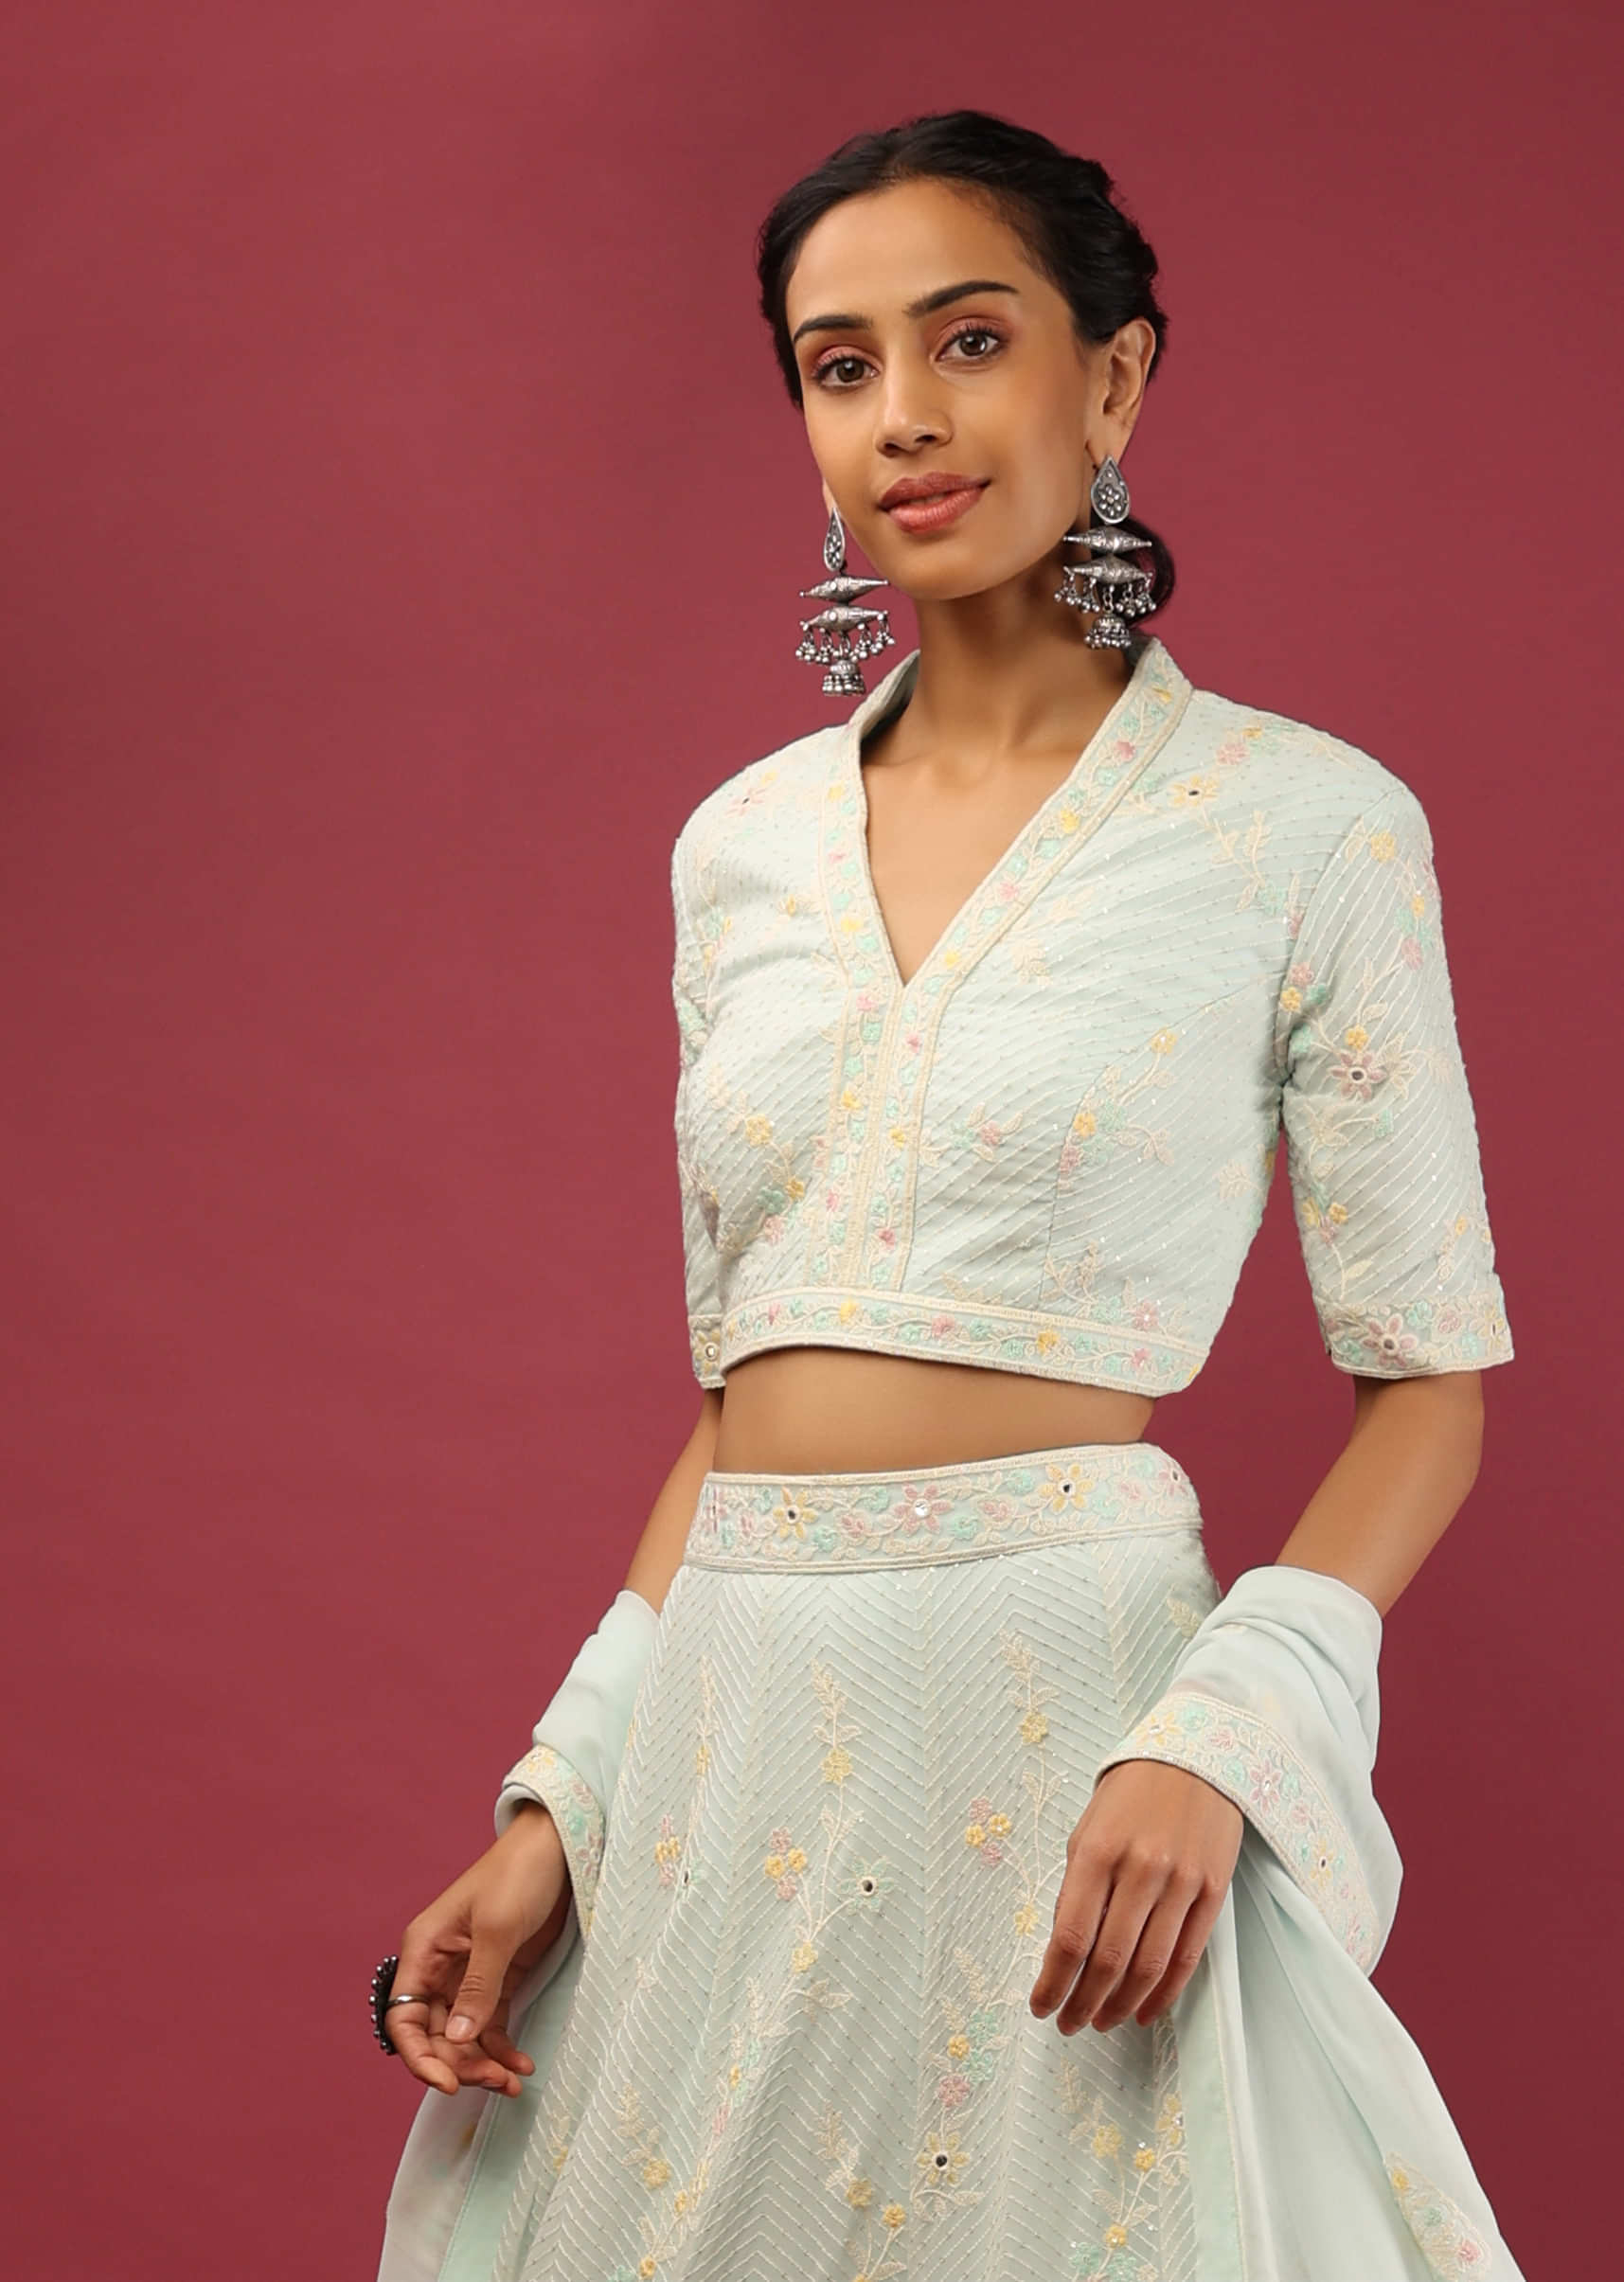 Ice Blue Lehenga Choli With Multi Colored Lucknowi Thread Embroidered Floral And Chevron Design Online - Kalki Fashion